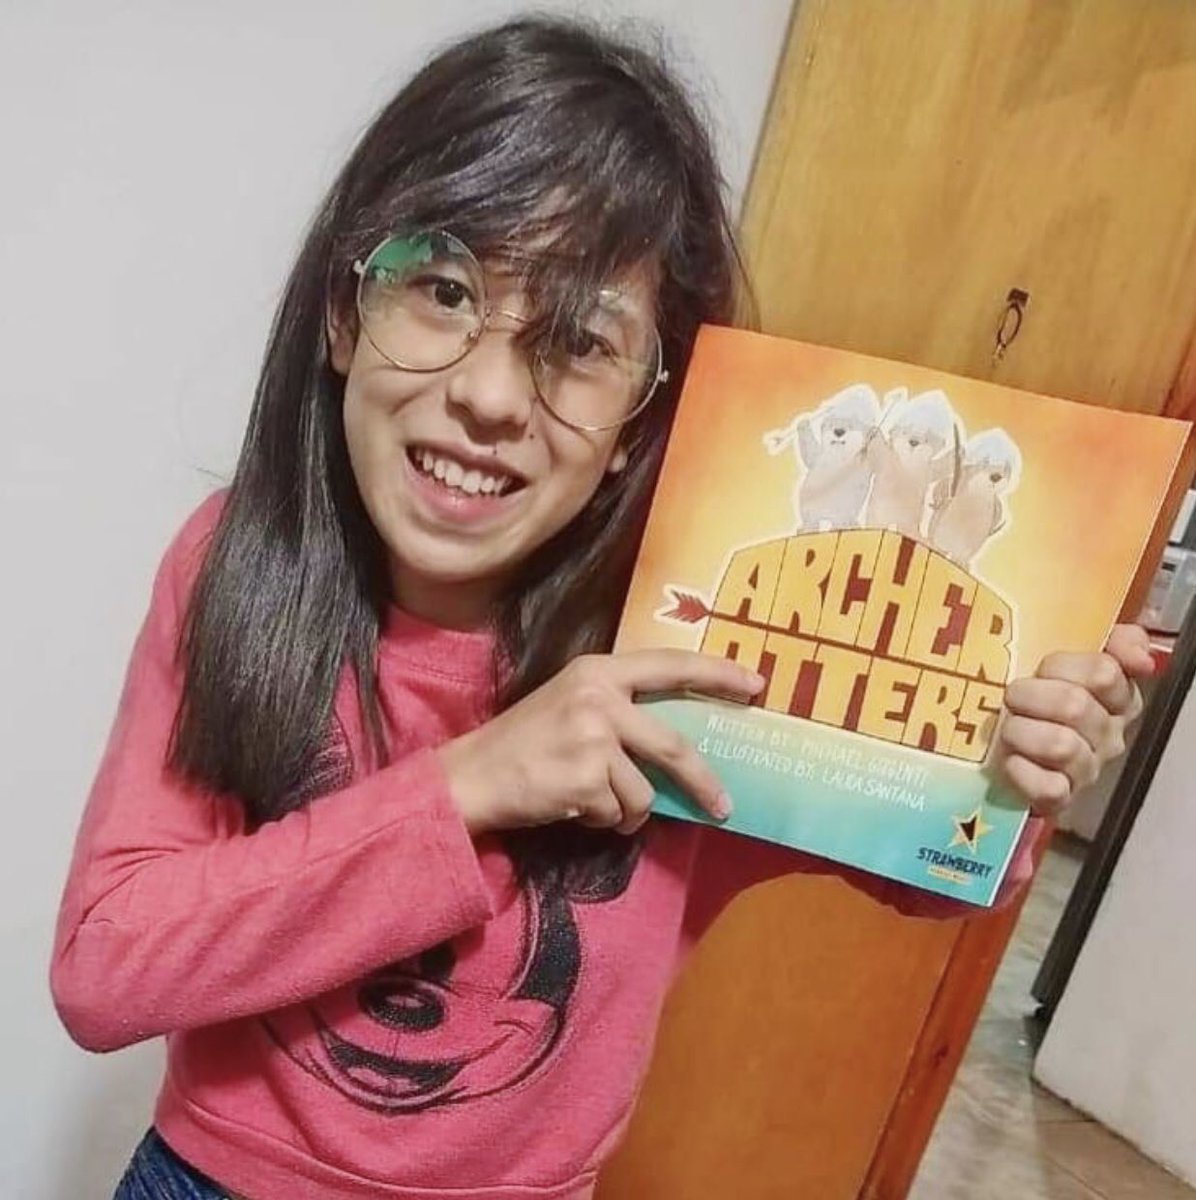 🌺 Celin just got her #ArcherOtters book!! 💜😃 Do you have yours??! Visit our website or search for the book title in @amazon to obtain your copy! 🦦🏹🦦🏹🦦🏹 Thank you again! #kidsbooks #picturebooks #kidsbookshelf #kidsbookreviews #childrensbooks #childrensplace #Otters #SPM